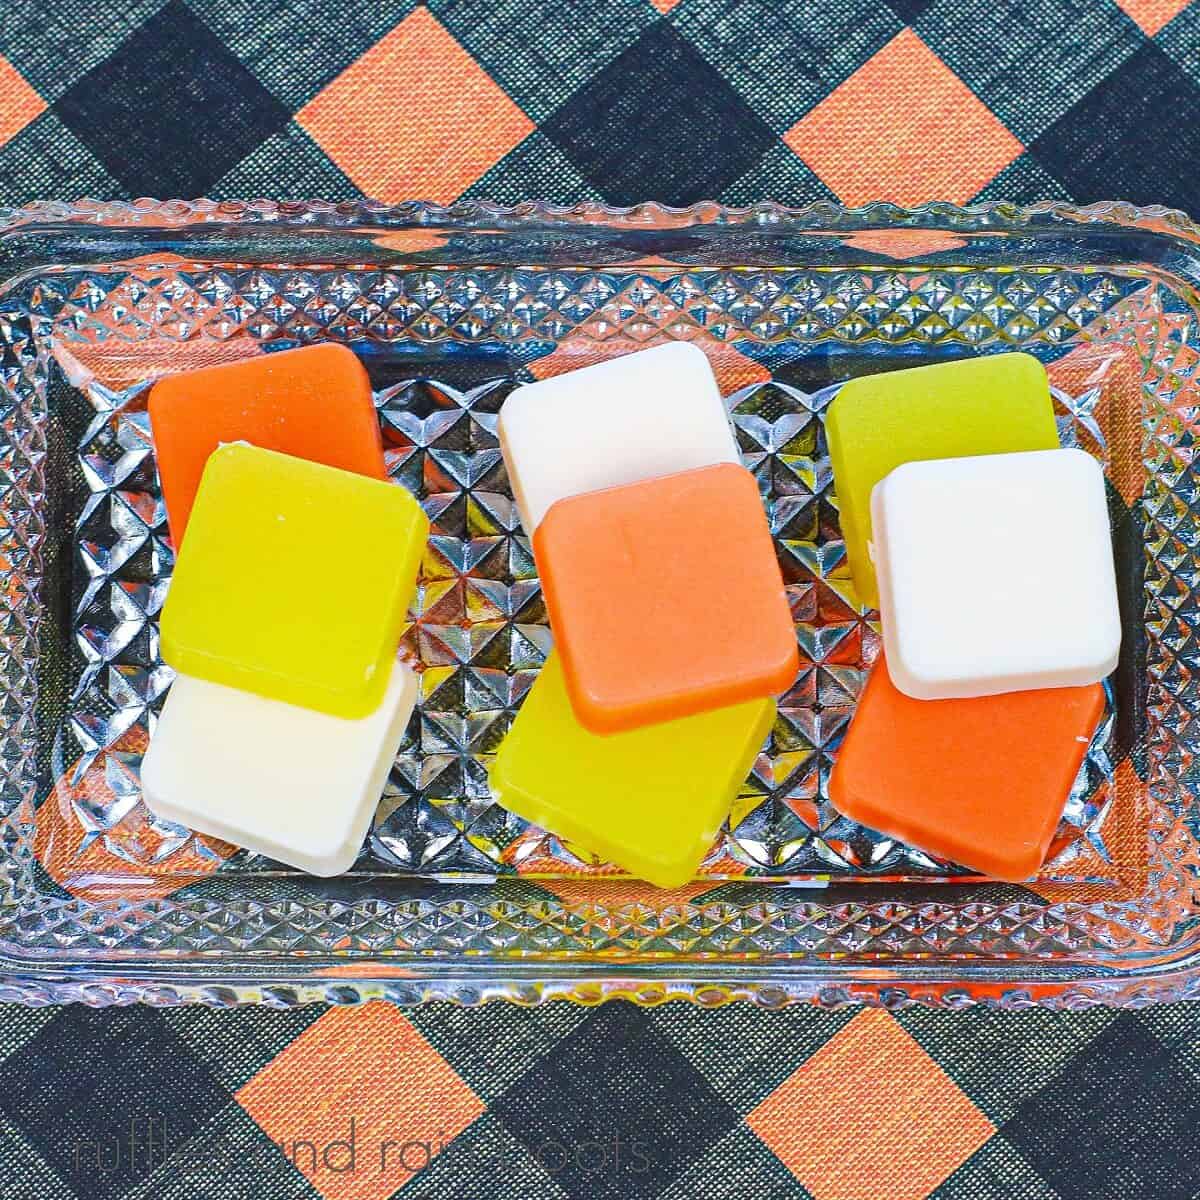 Several Candy Corn Sugar Scrub Cubes on a glass dish against a black and orange background.